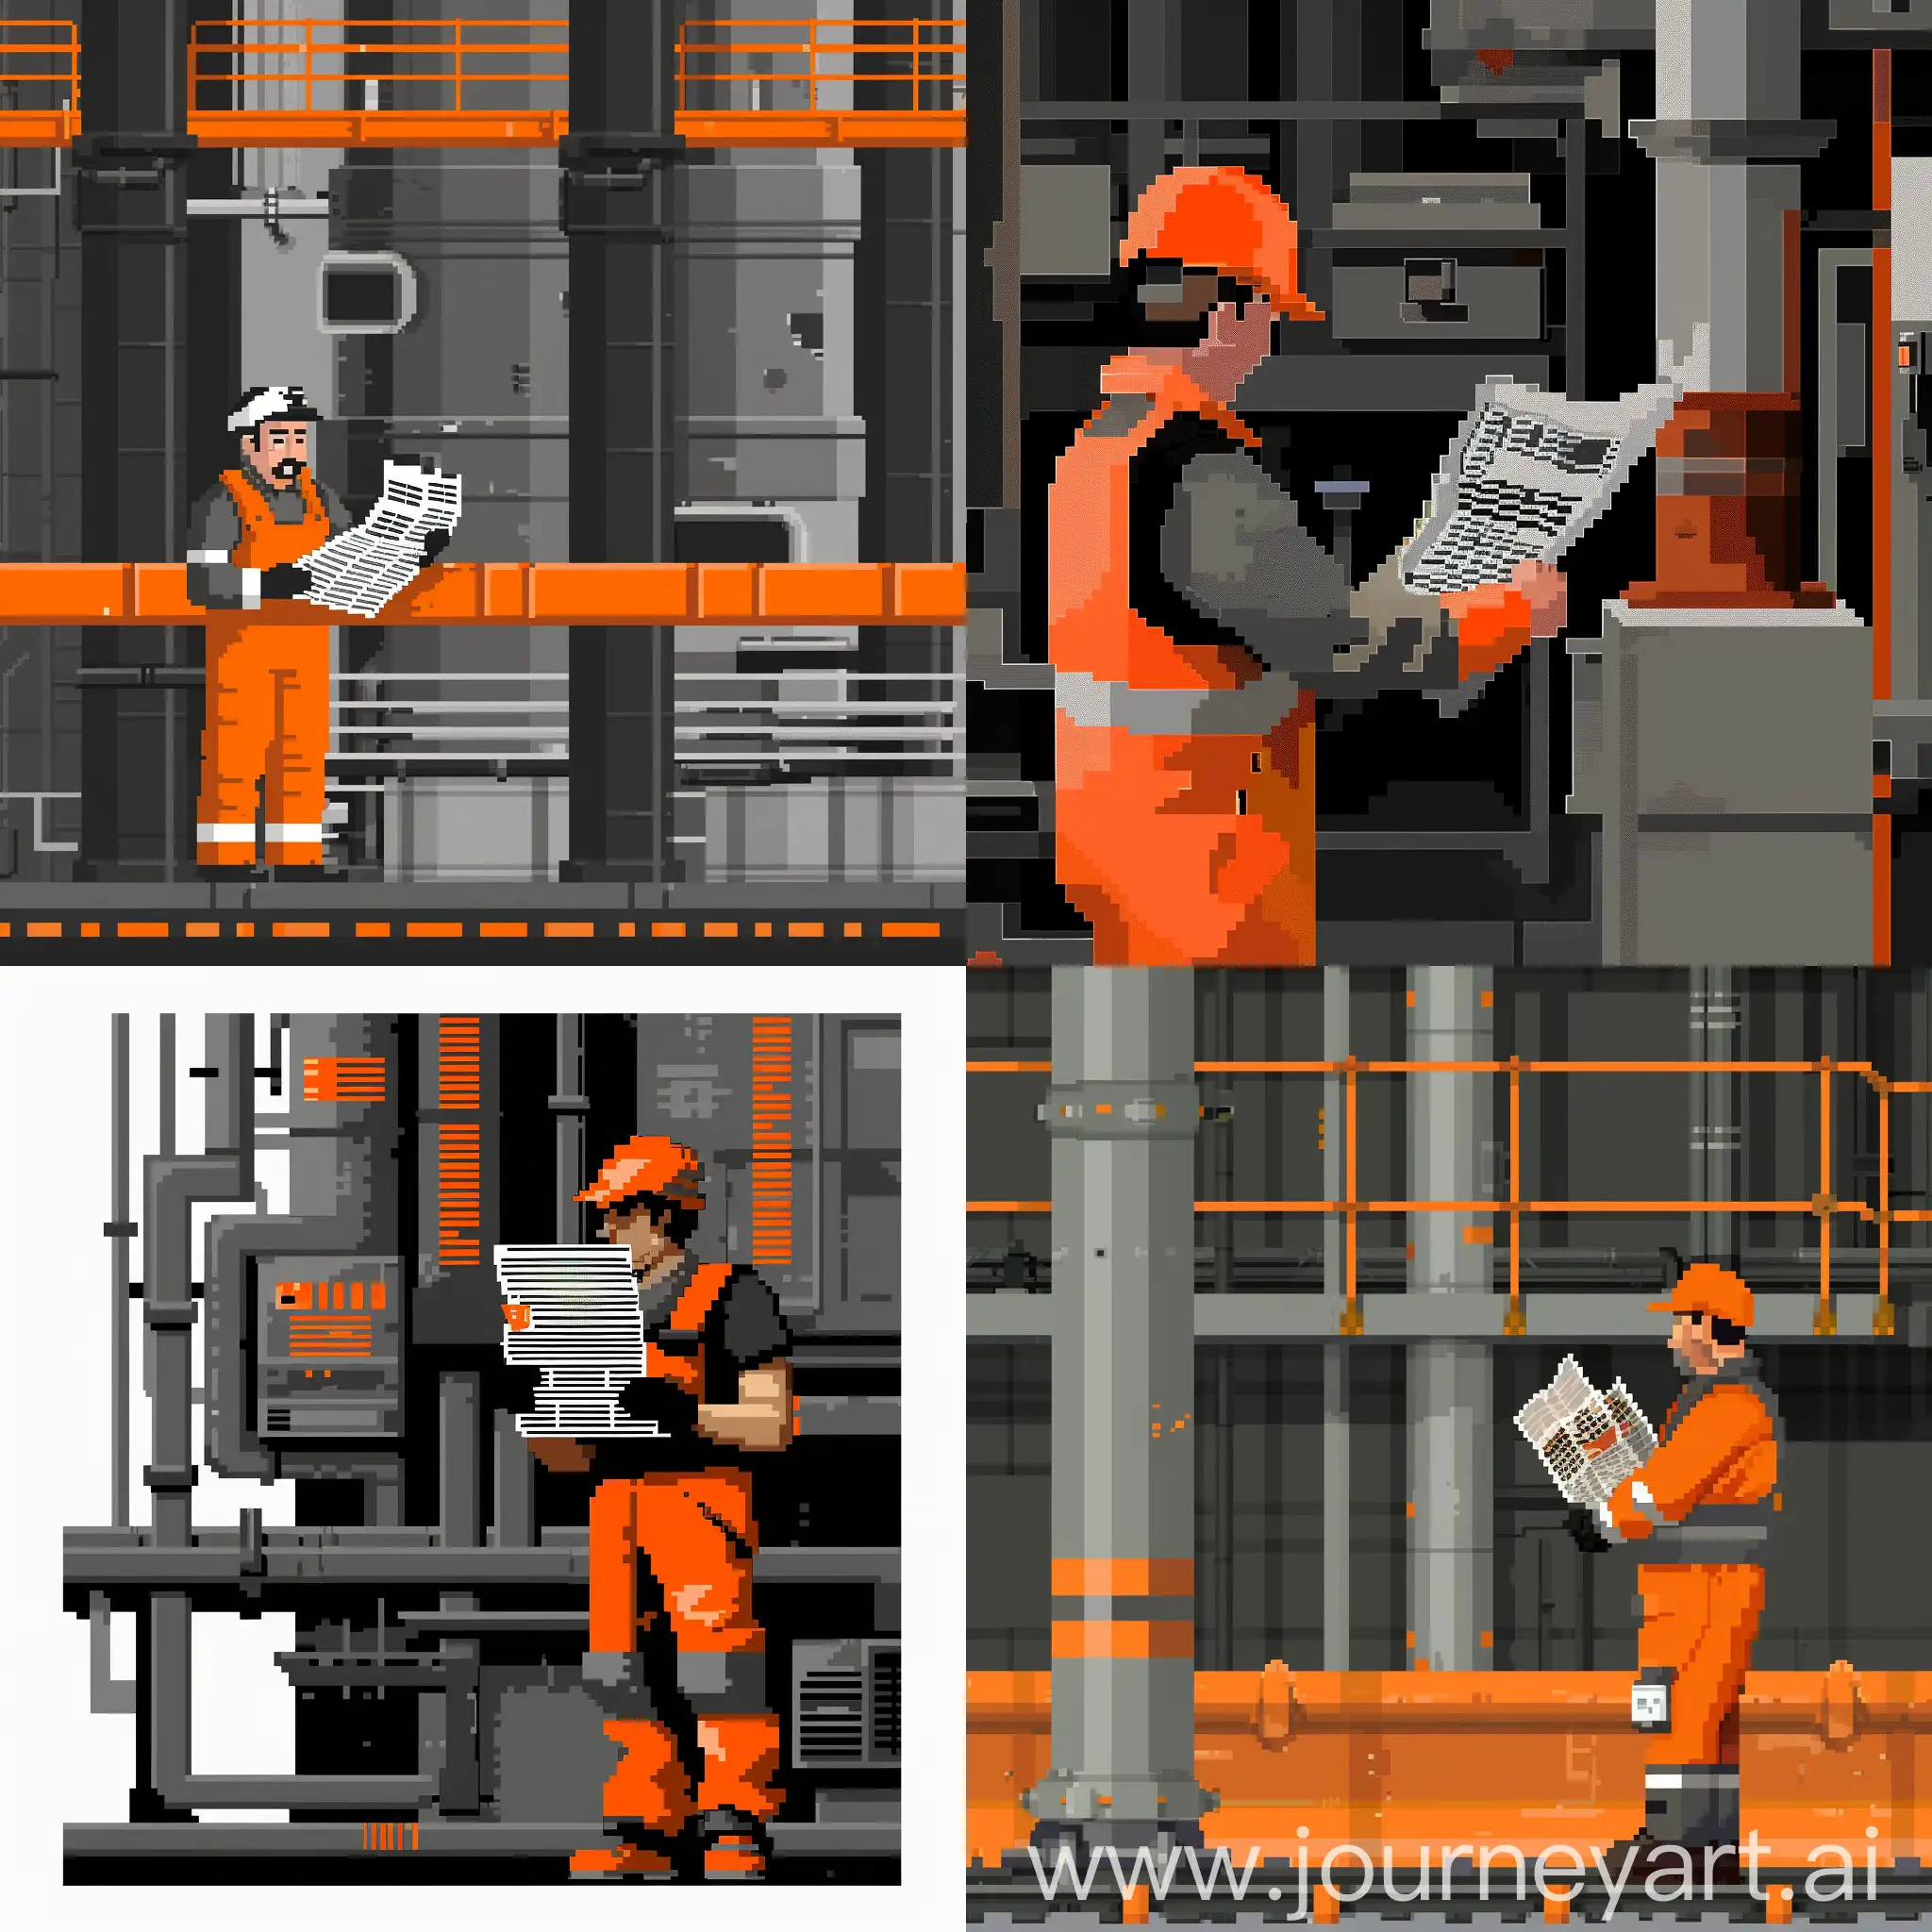 pixel art, orange black white and gray colors, factory worker reading a newspaper